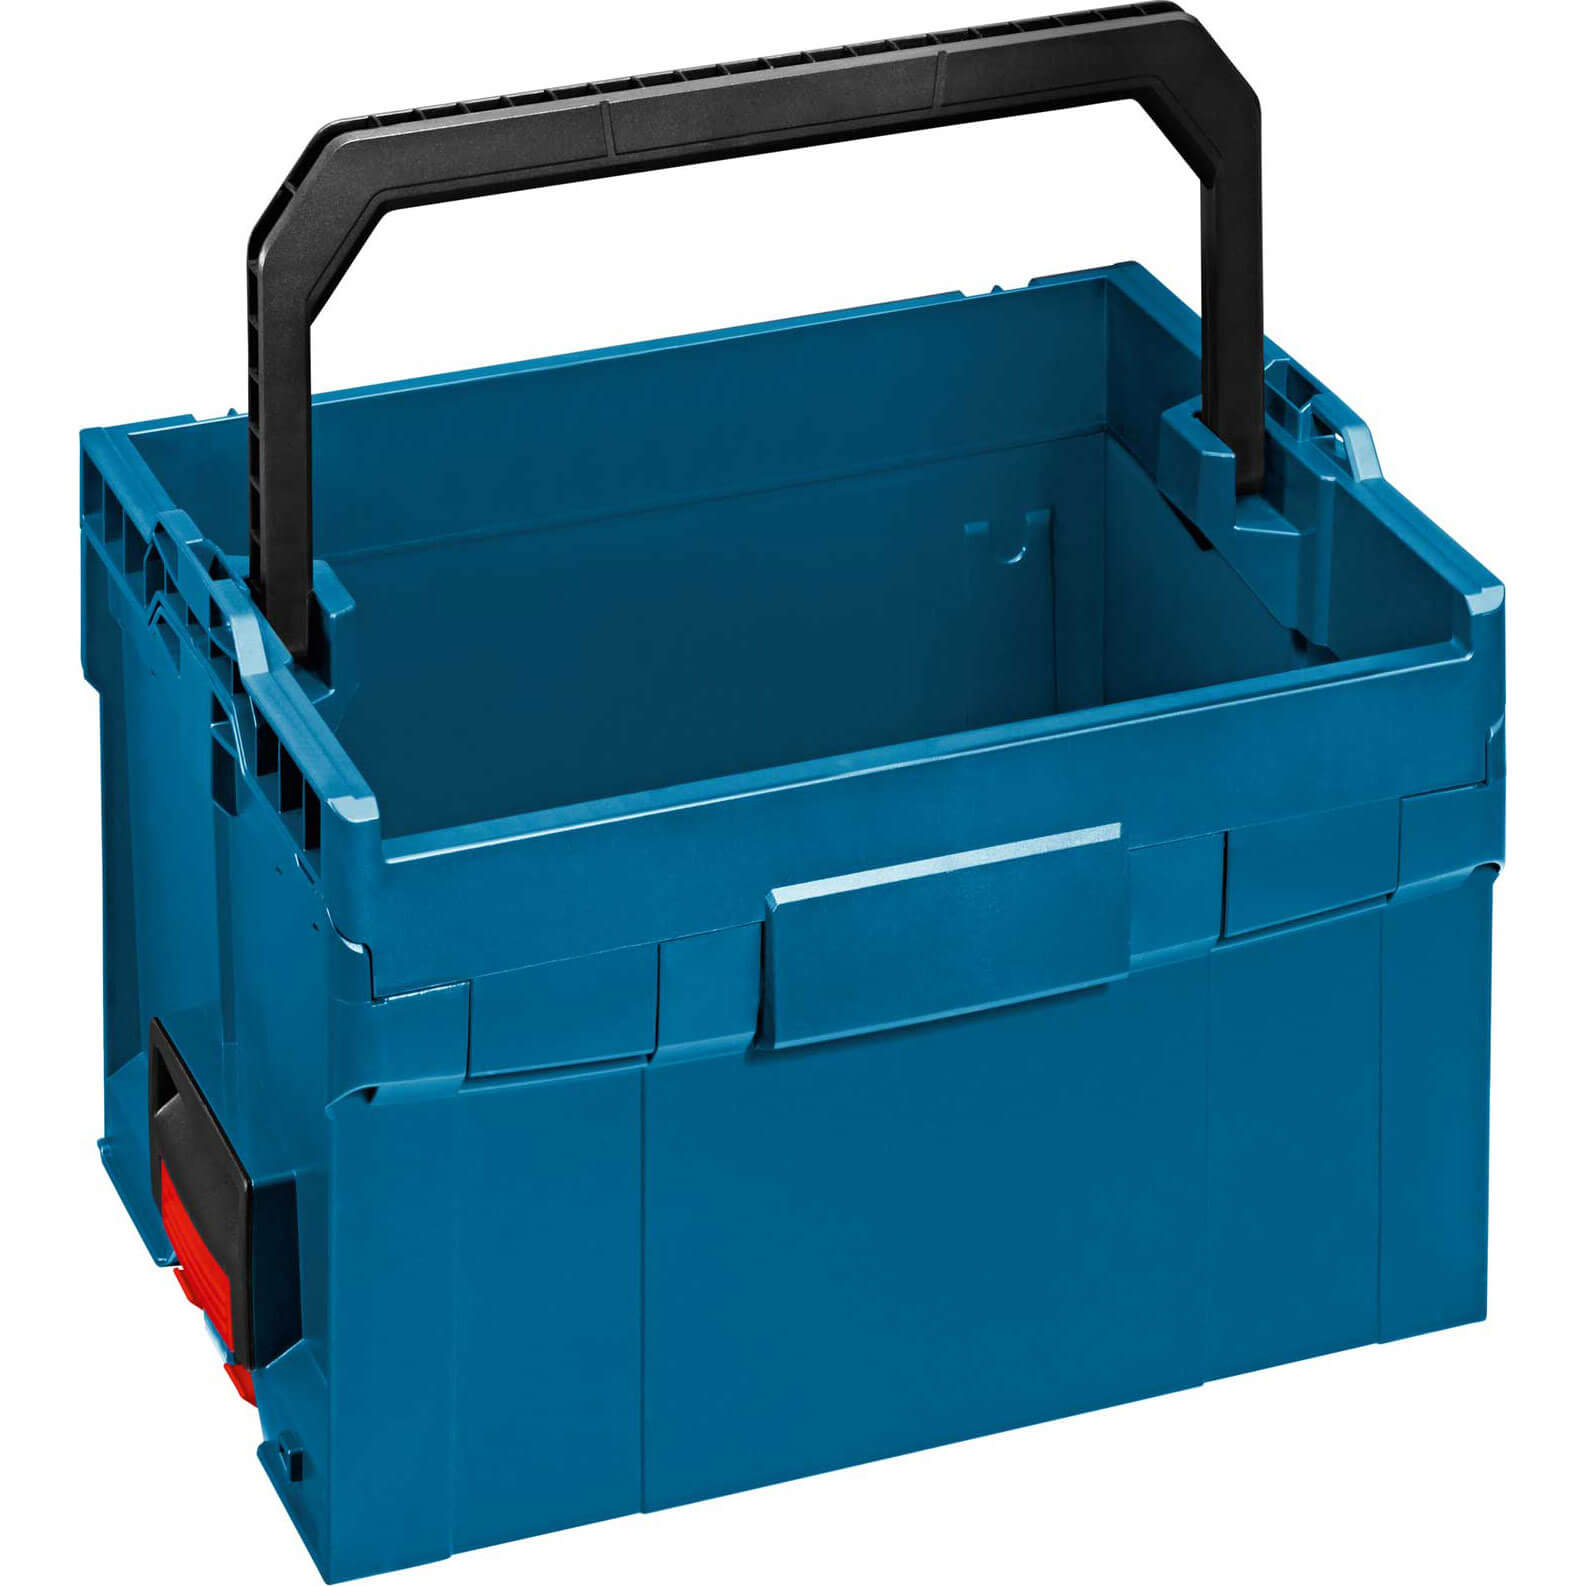 Image of Bosch LT-BOXX Power Tool Tote 272mm